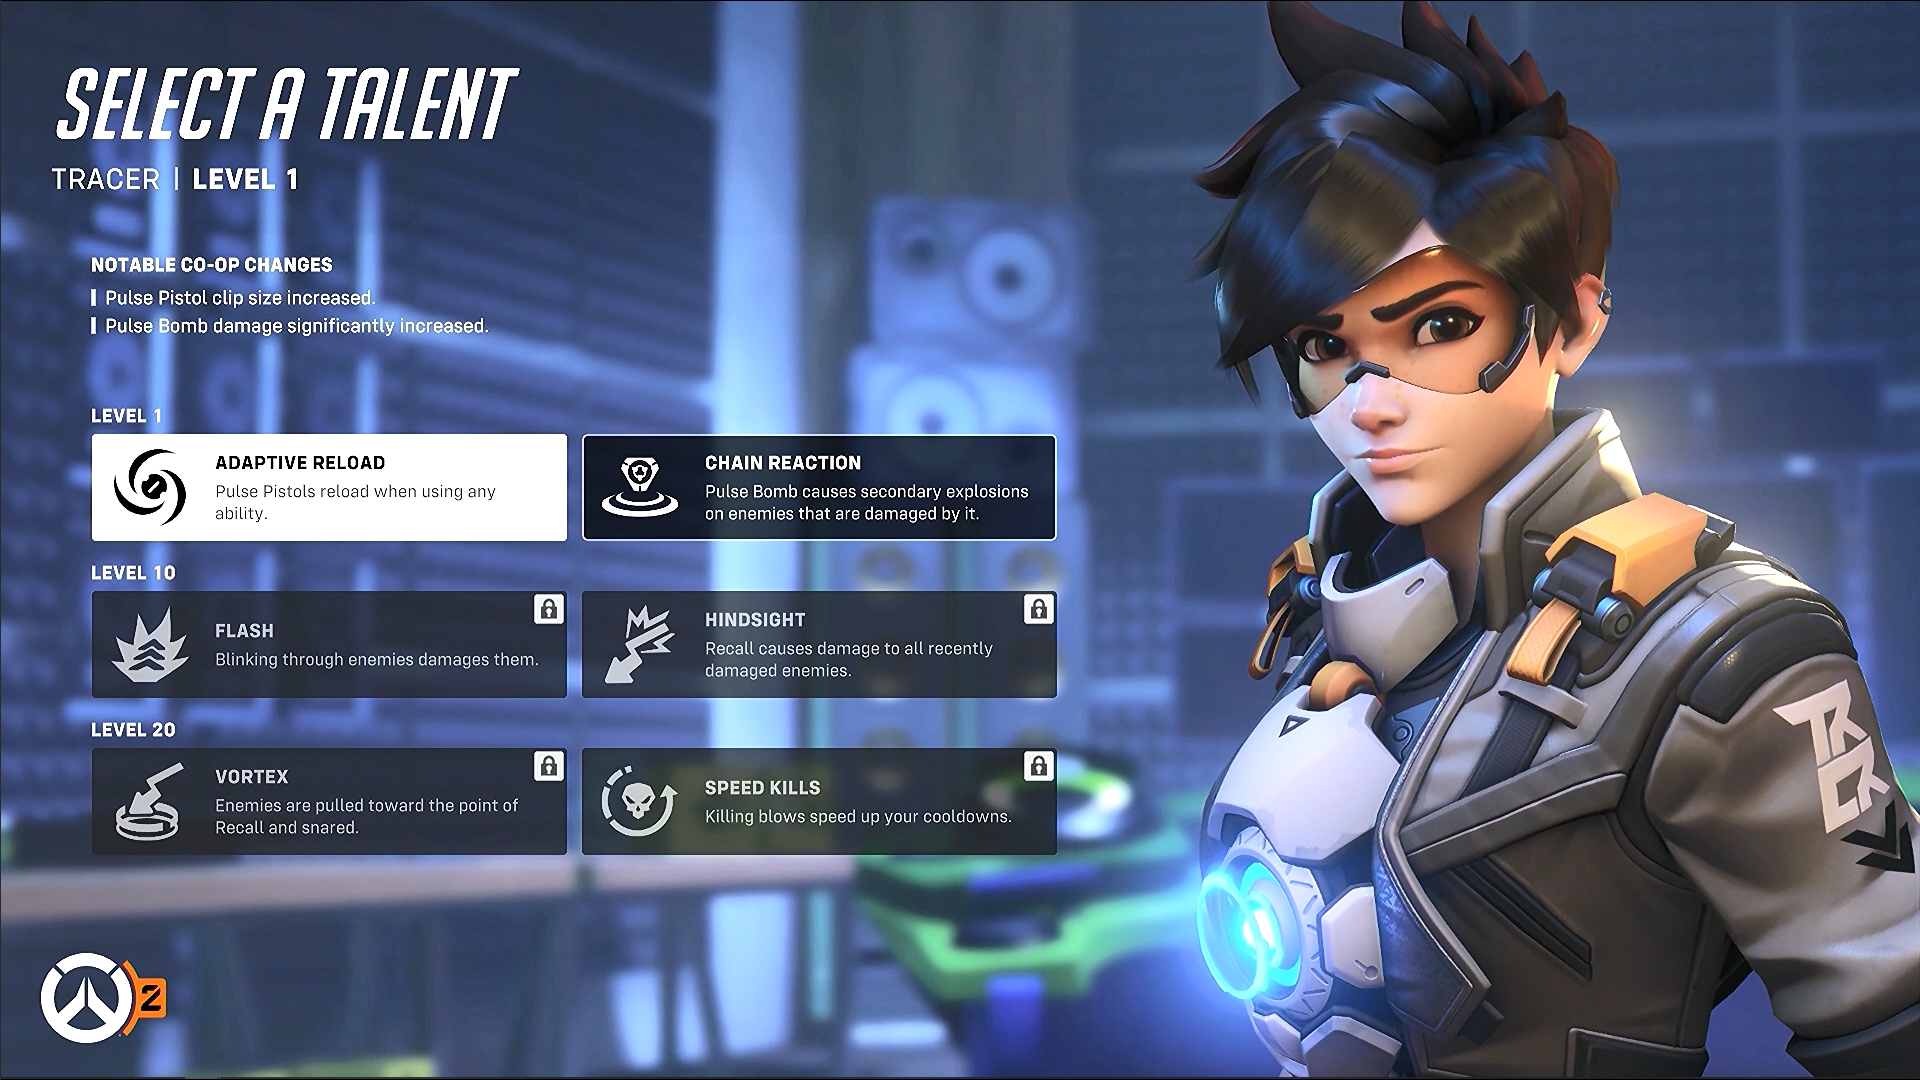 Overwatch 2 Tracer: Abilities, Changes & PlayStyle 